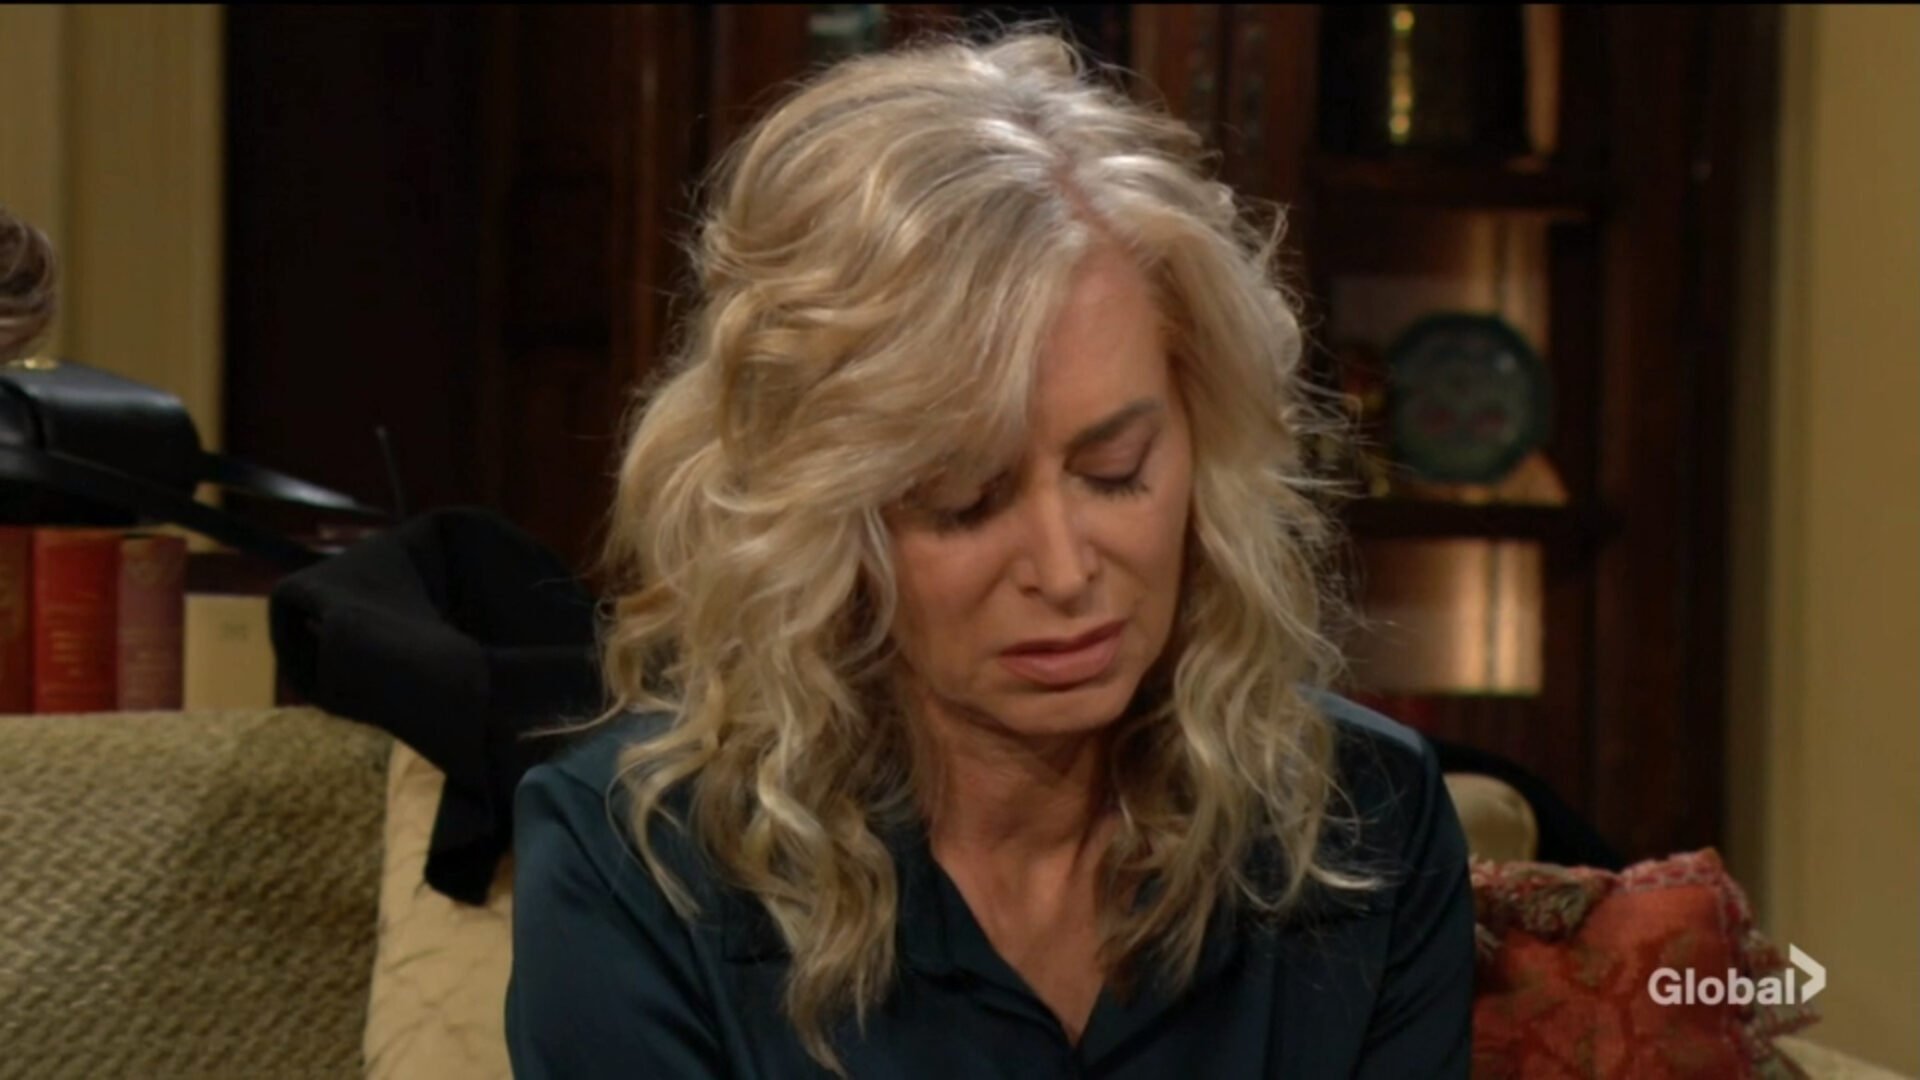 ashley accuses tucker of making her think she's insane Y&R recaps